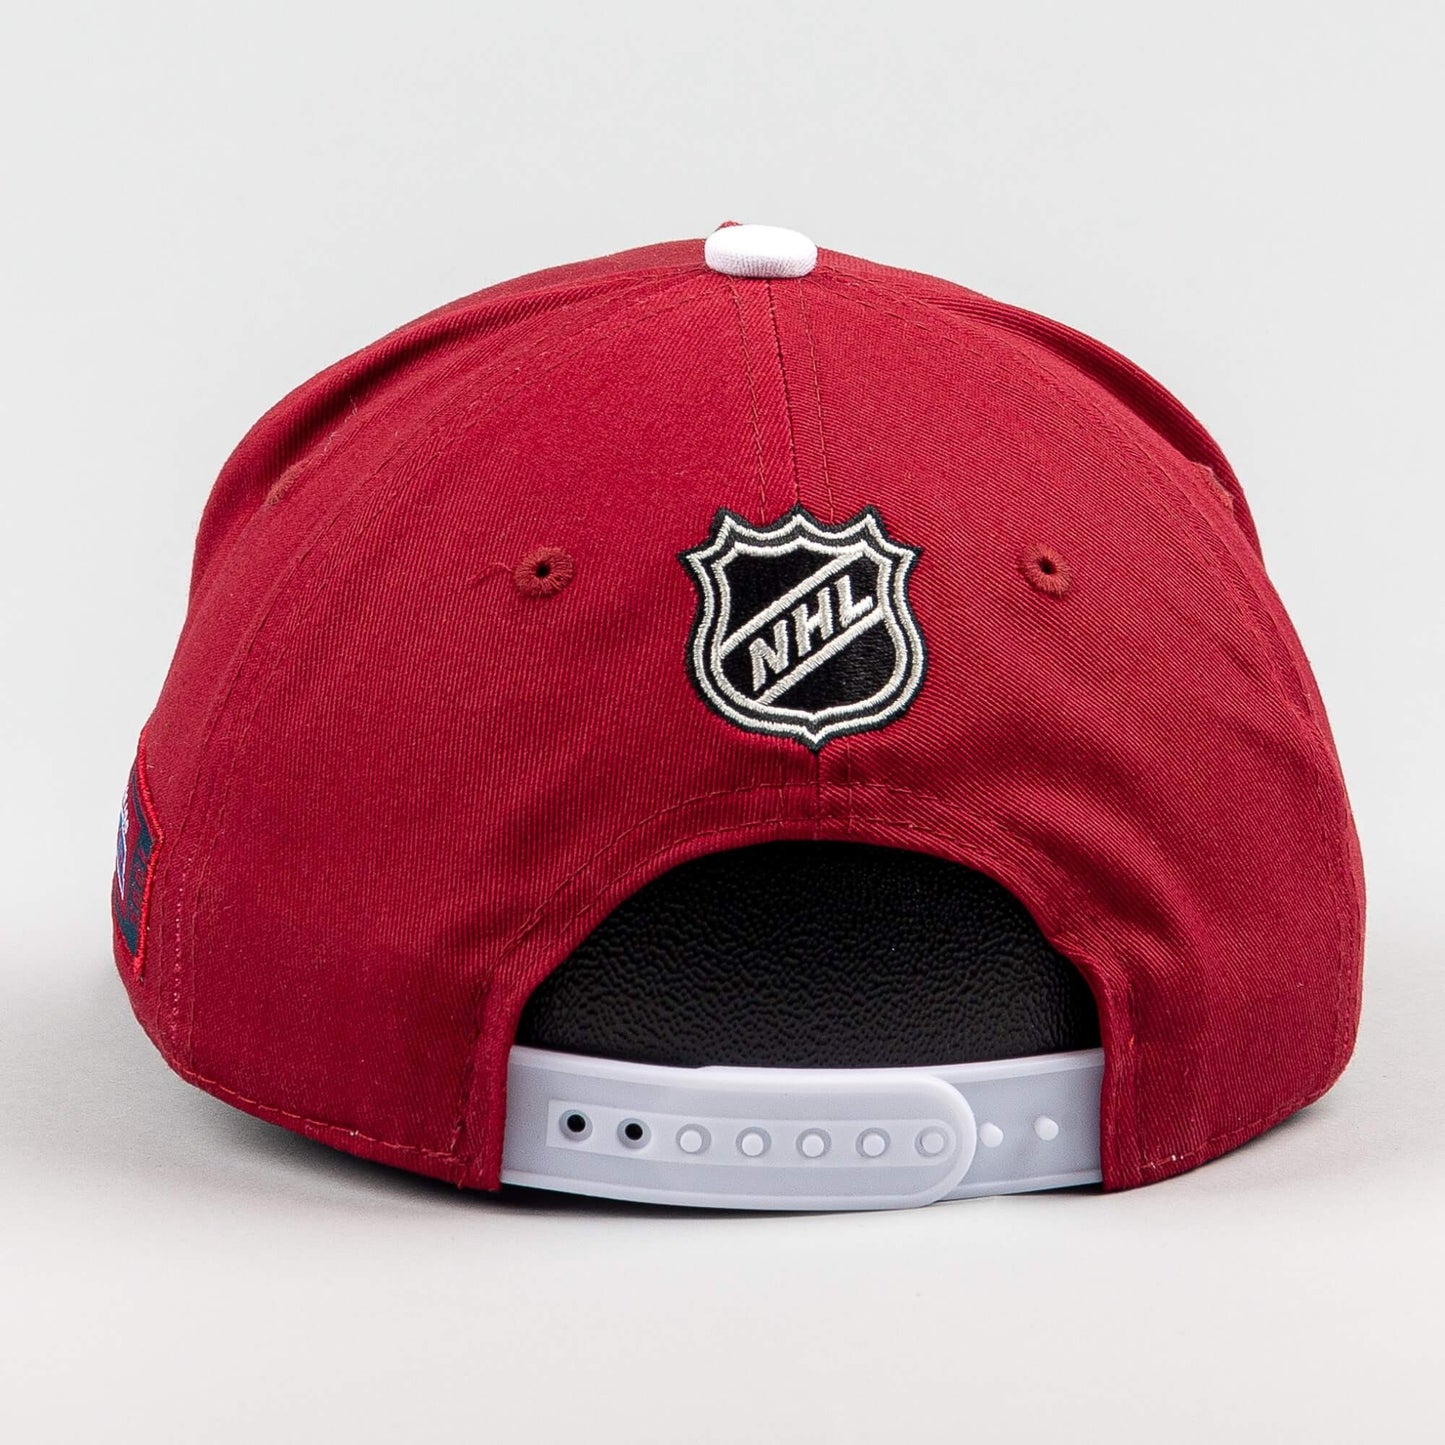 Outer Stuff NHL Big-Face Precurved Snap Avalanche Bordeaux